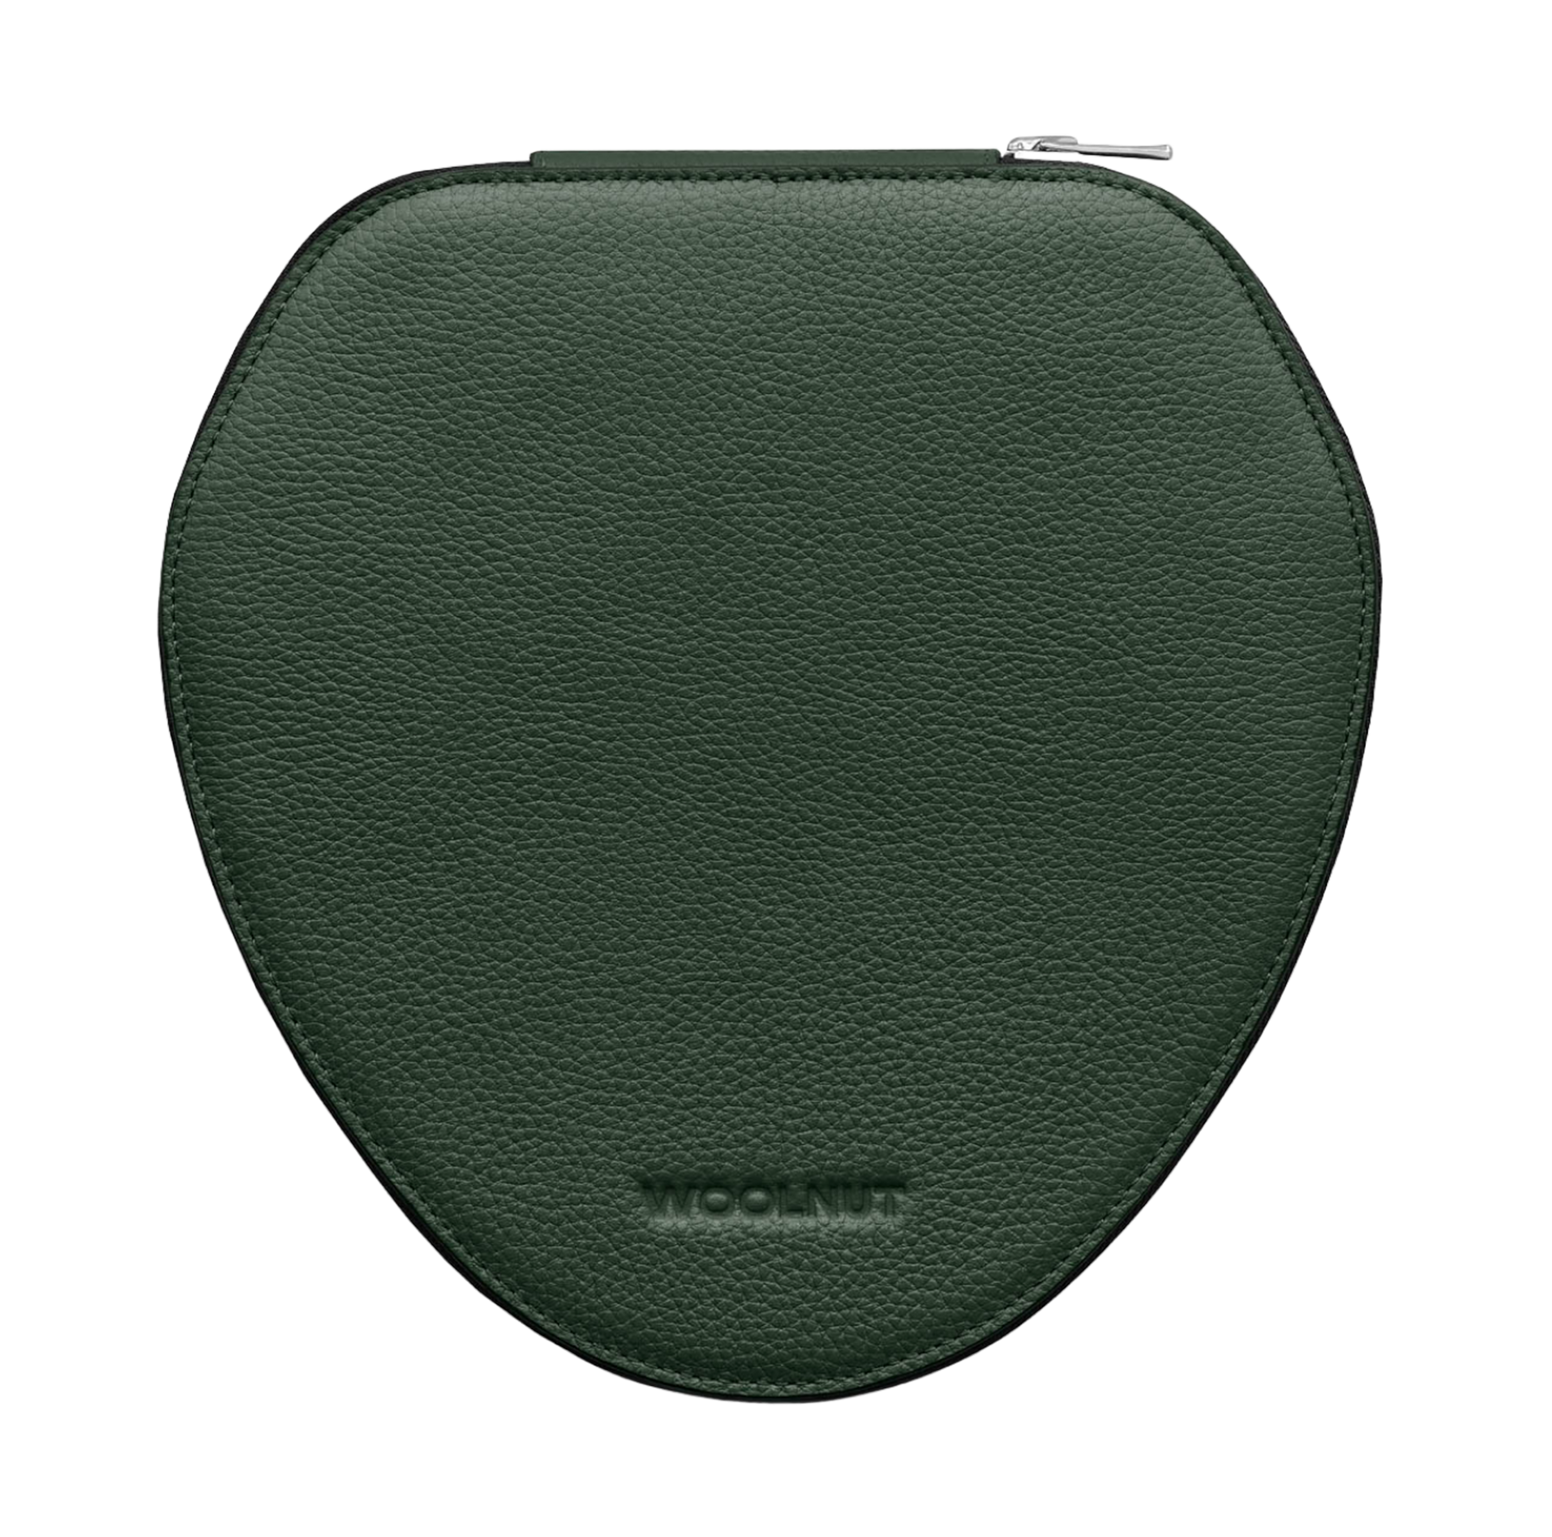 WOOLNUT Leather Case for AirPods Max - Green